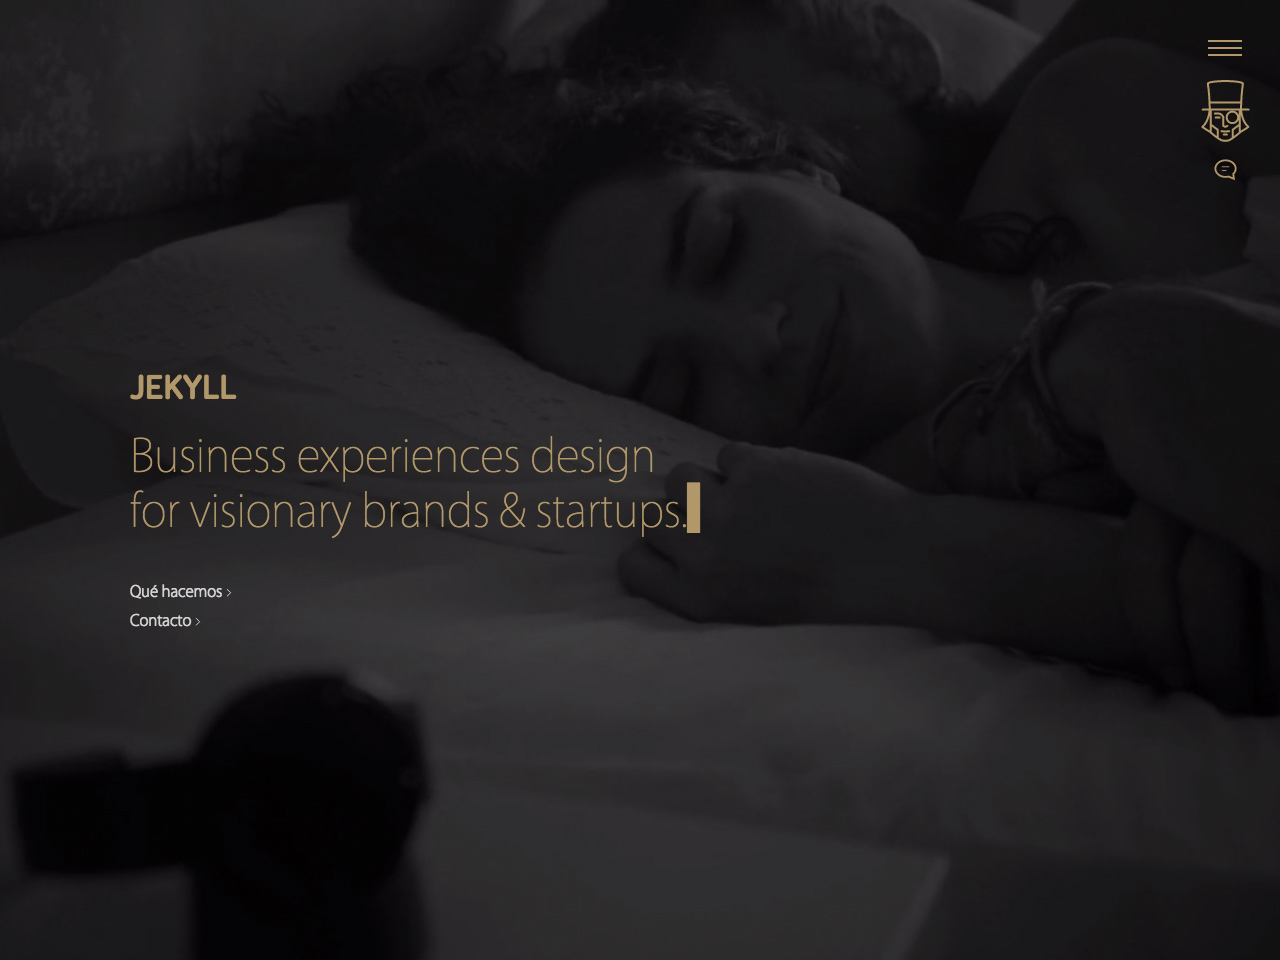 JEKYLL | business experiences design for Brands & Startups